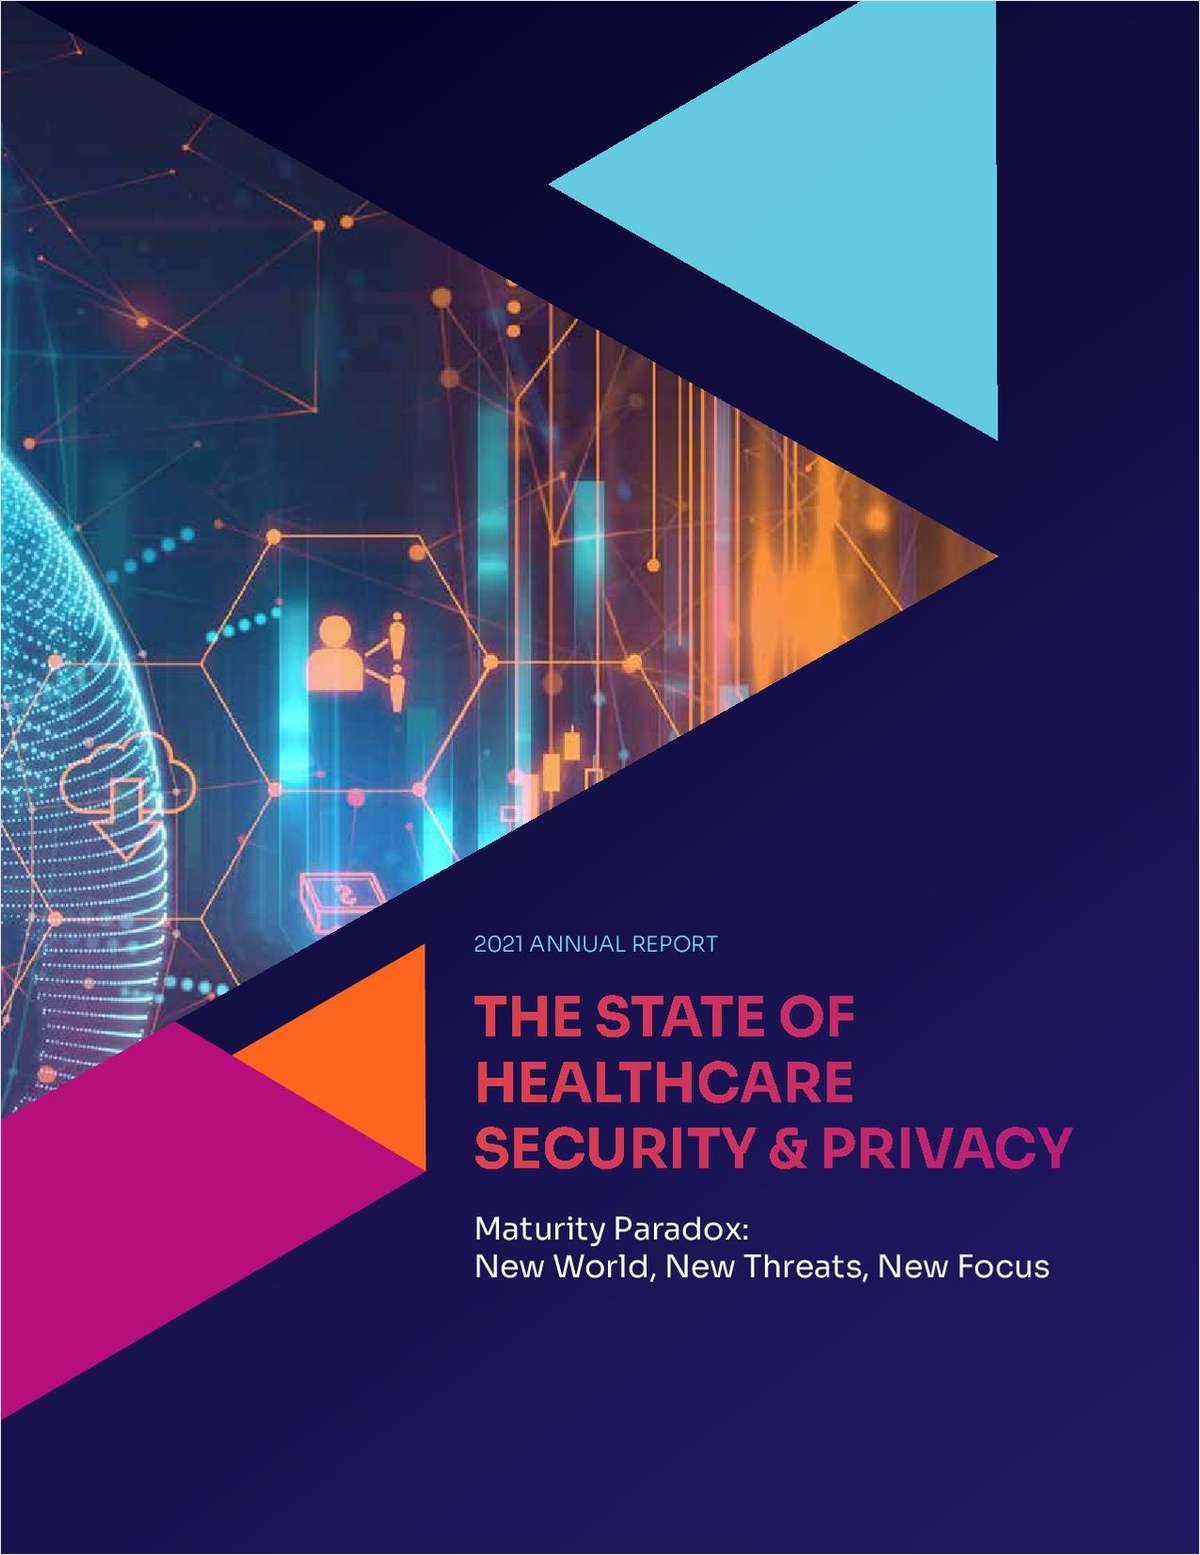 The State of Healthcare Security & Privacy 2021 Annual Report